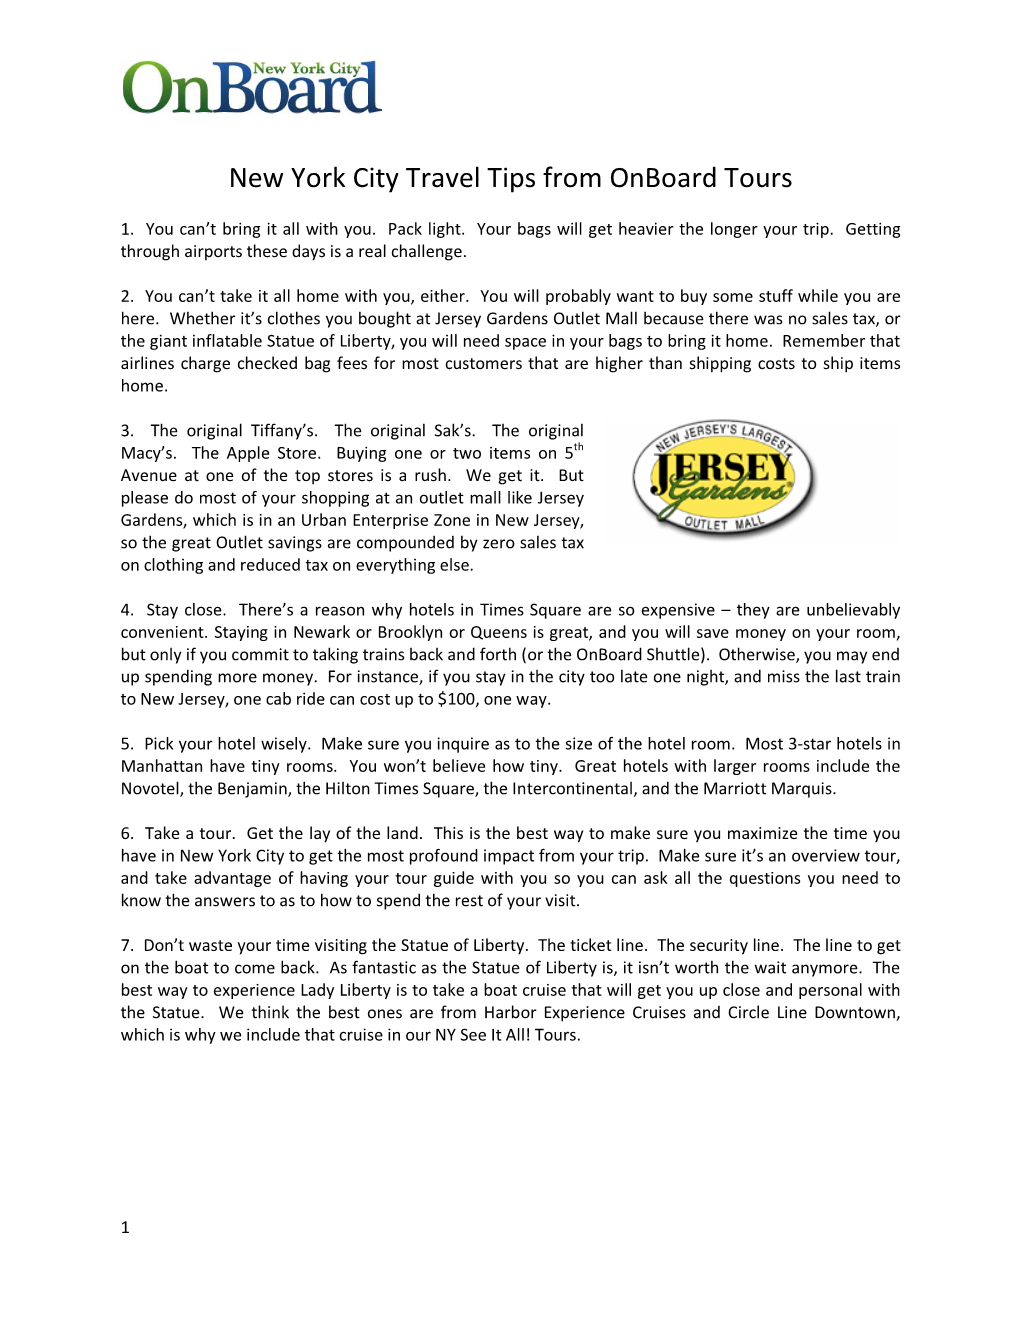 New York City Travel Tips from Onboard Tours